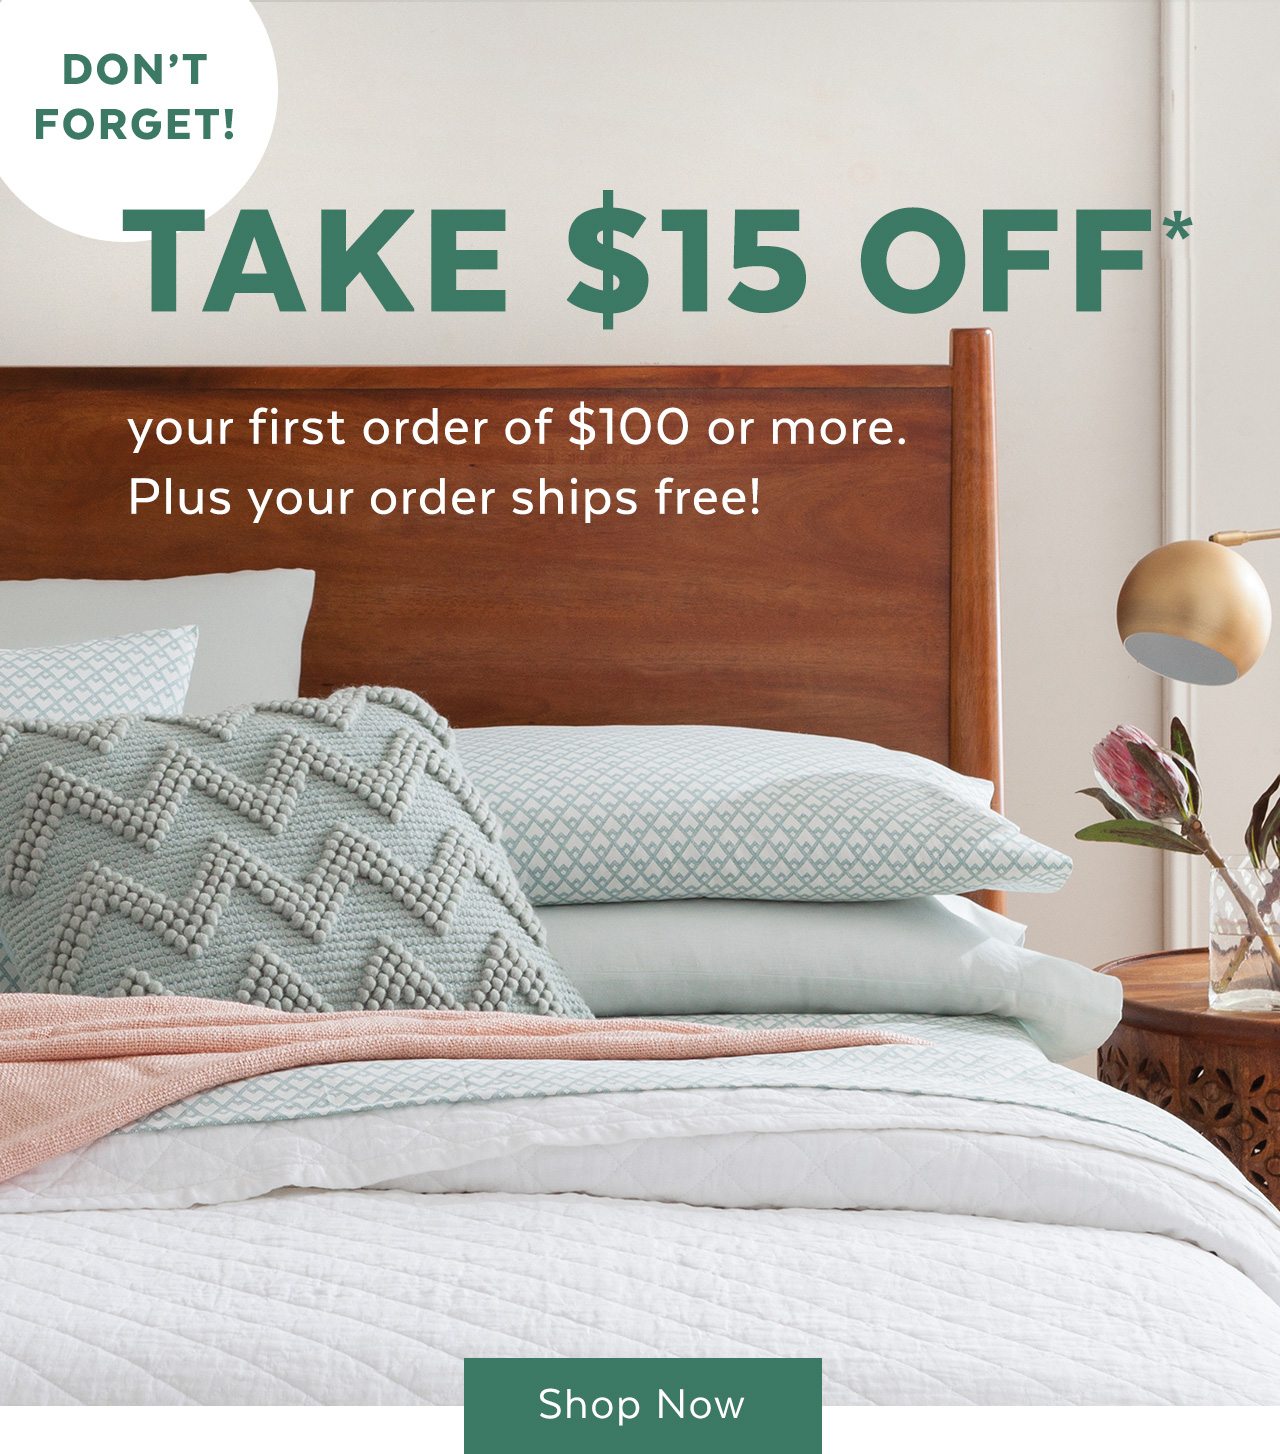 Don’t forget! Take $15 off* your first order of $100 or more. Plus your order ships free! Shop now